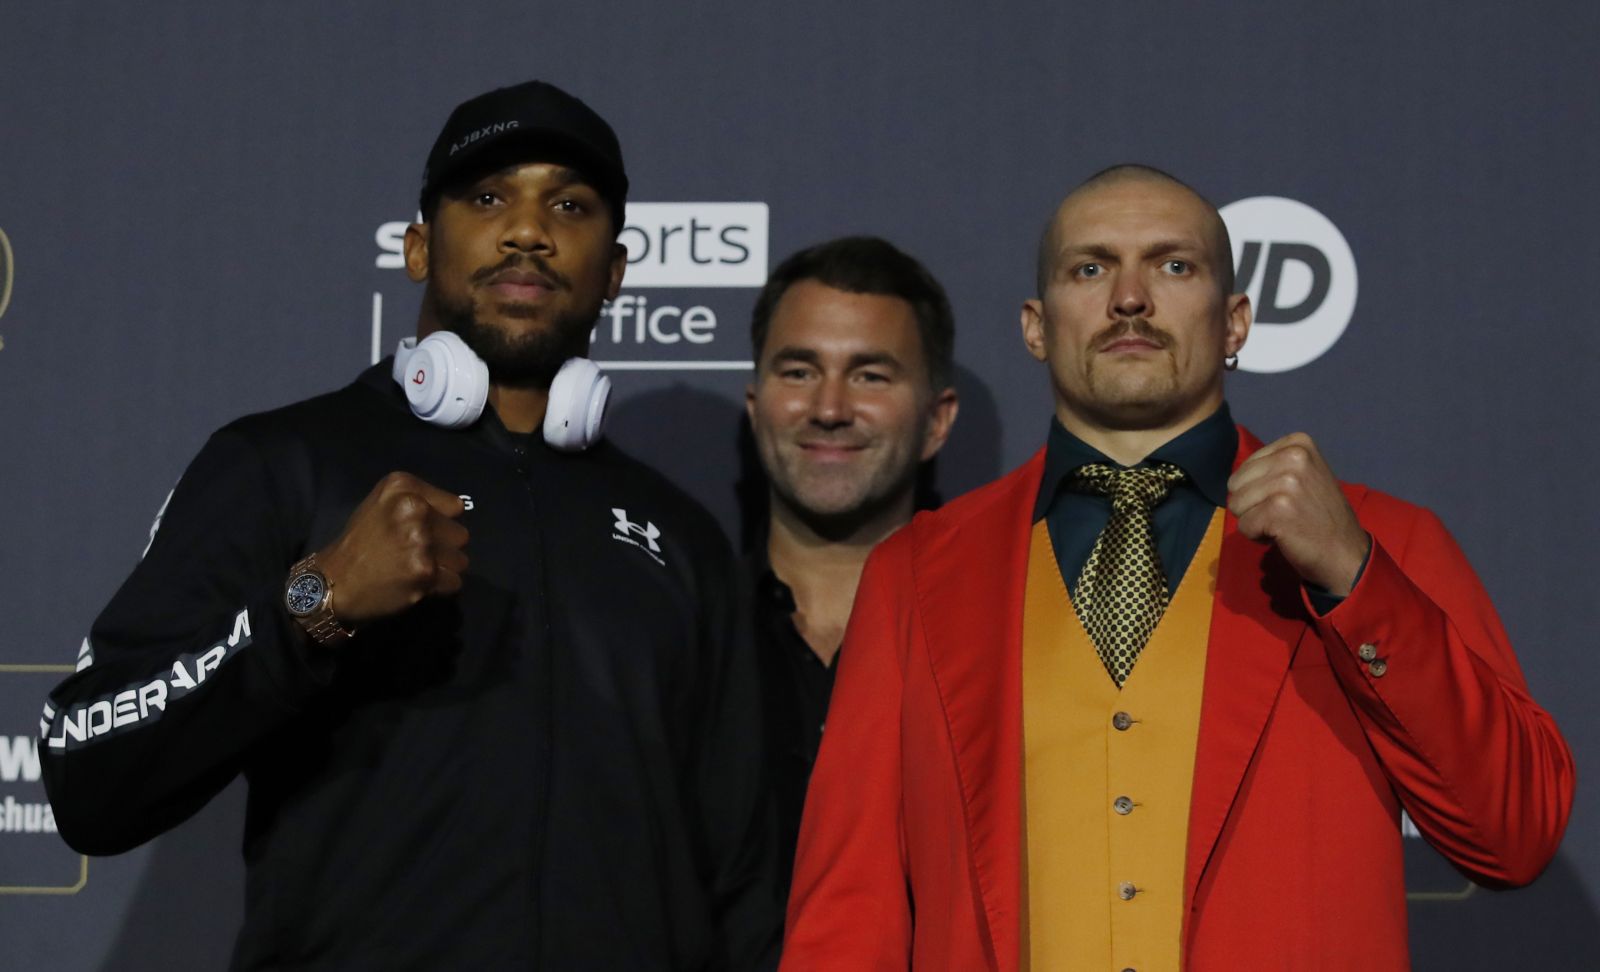 Boxing - Anthony Joshua and Oleksandr Usyk News Conference - Tottenham Hotspur Stadium, London, Britain - September 23, 2021 Anthony Joshua and Oleksandr Usyk pose with promoter Eddie Hearn during the press conference Action Images via Reuters/Andrew Couldridge